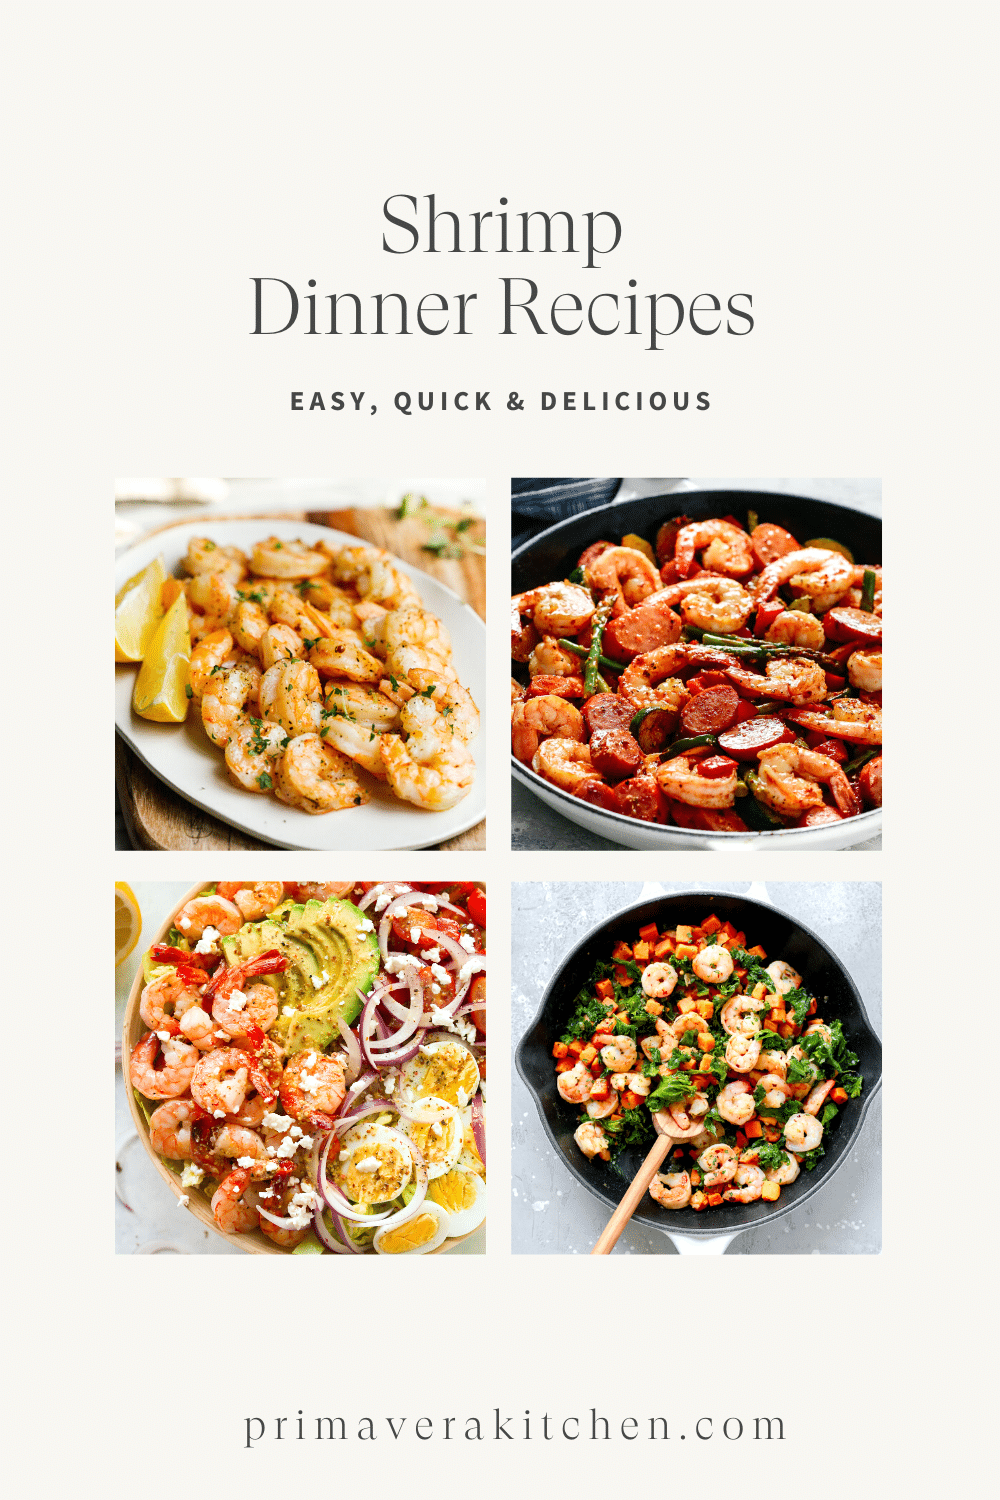 Round up image with text "Shrimp Dinner Recipes"